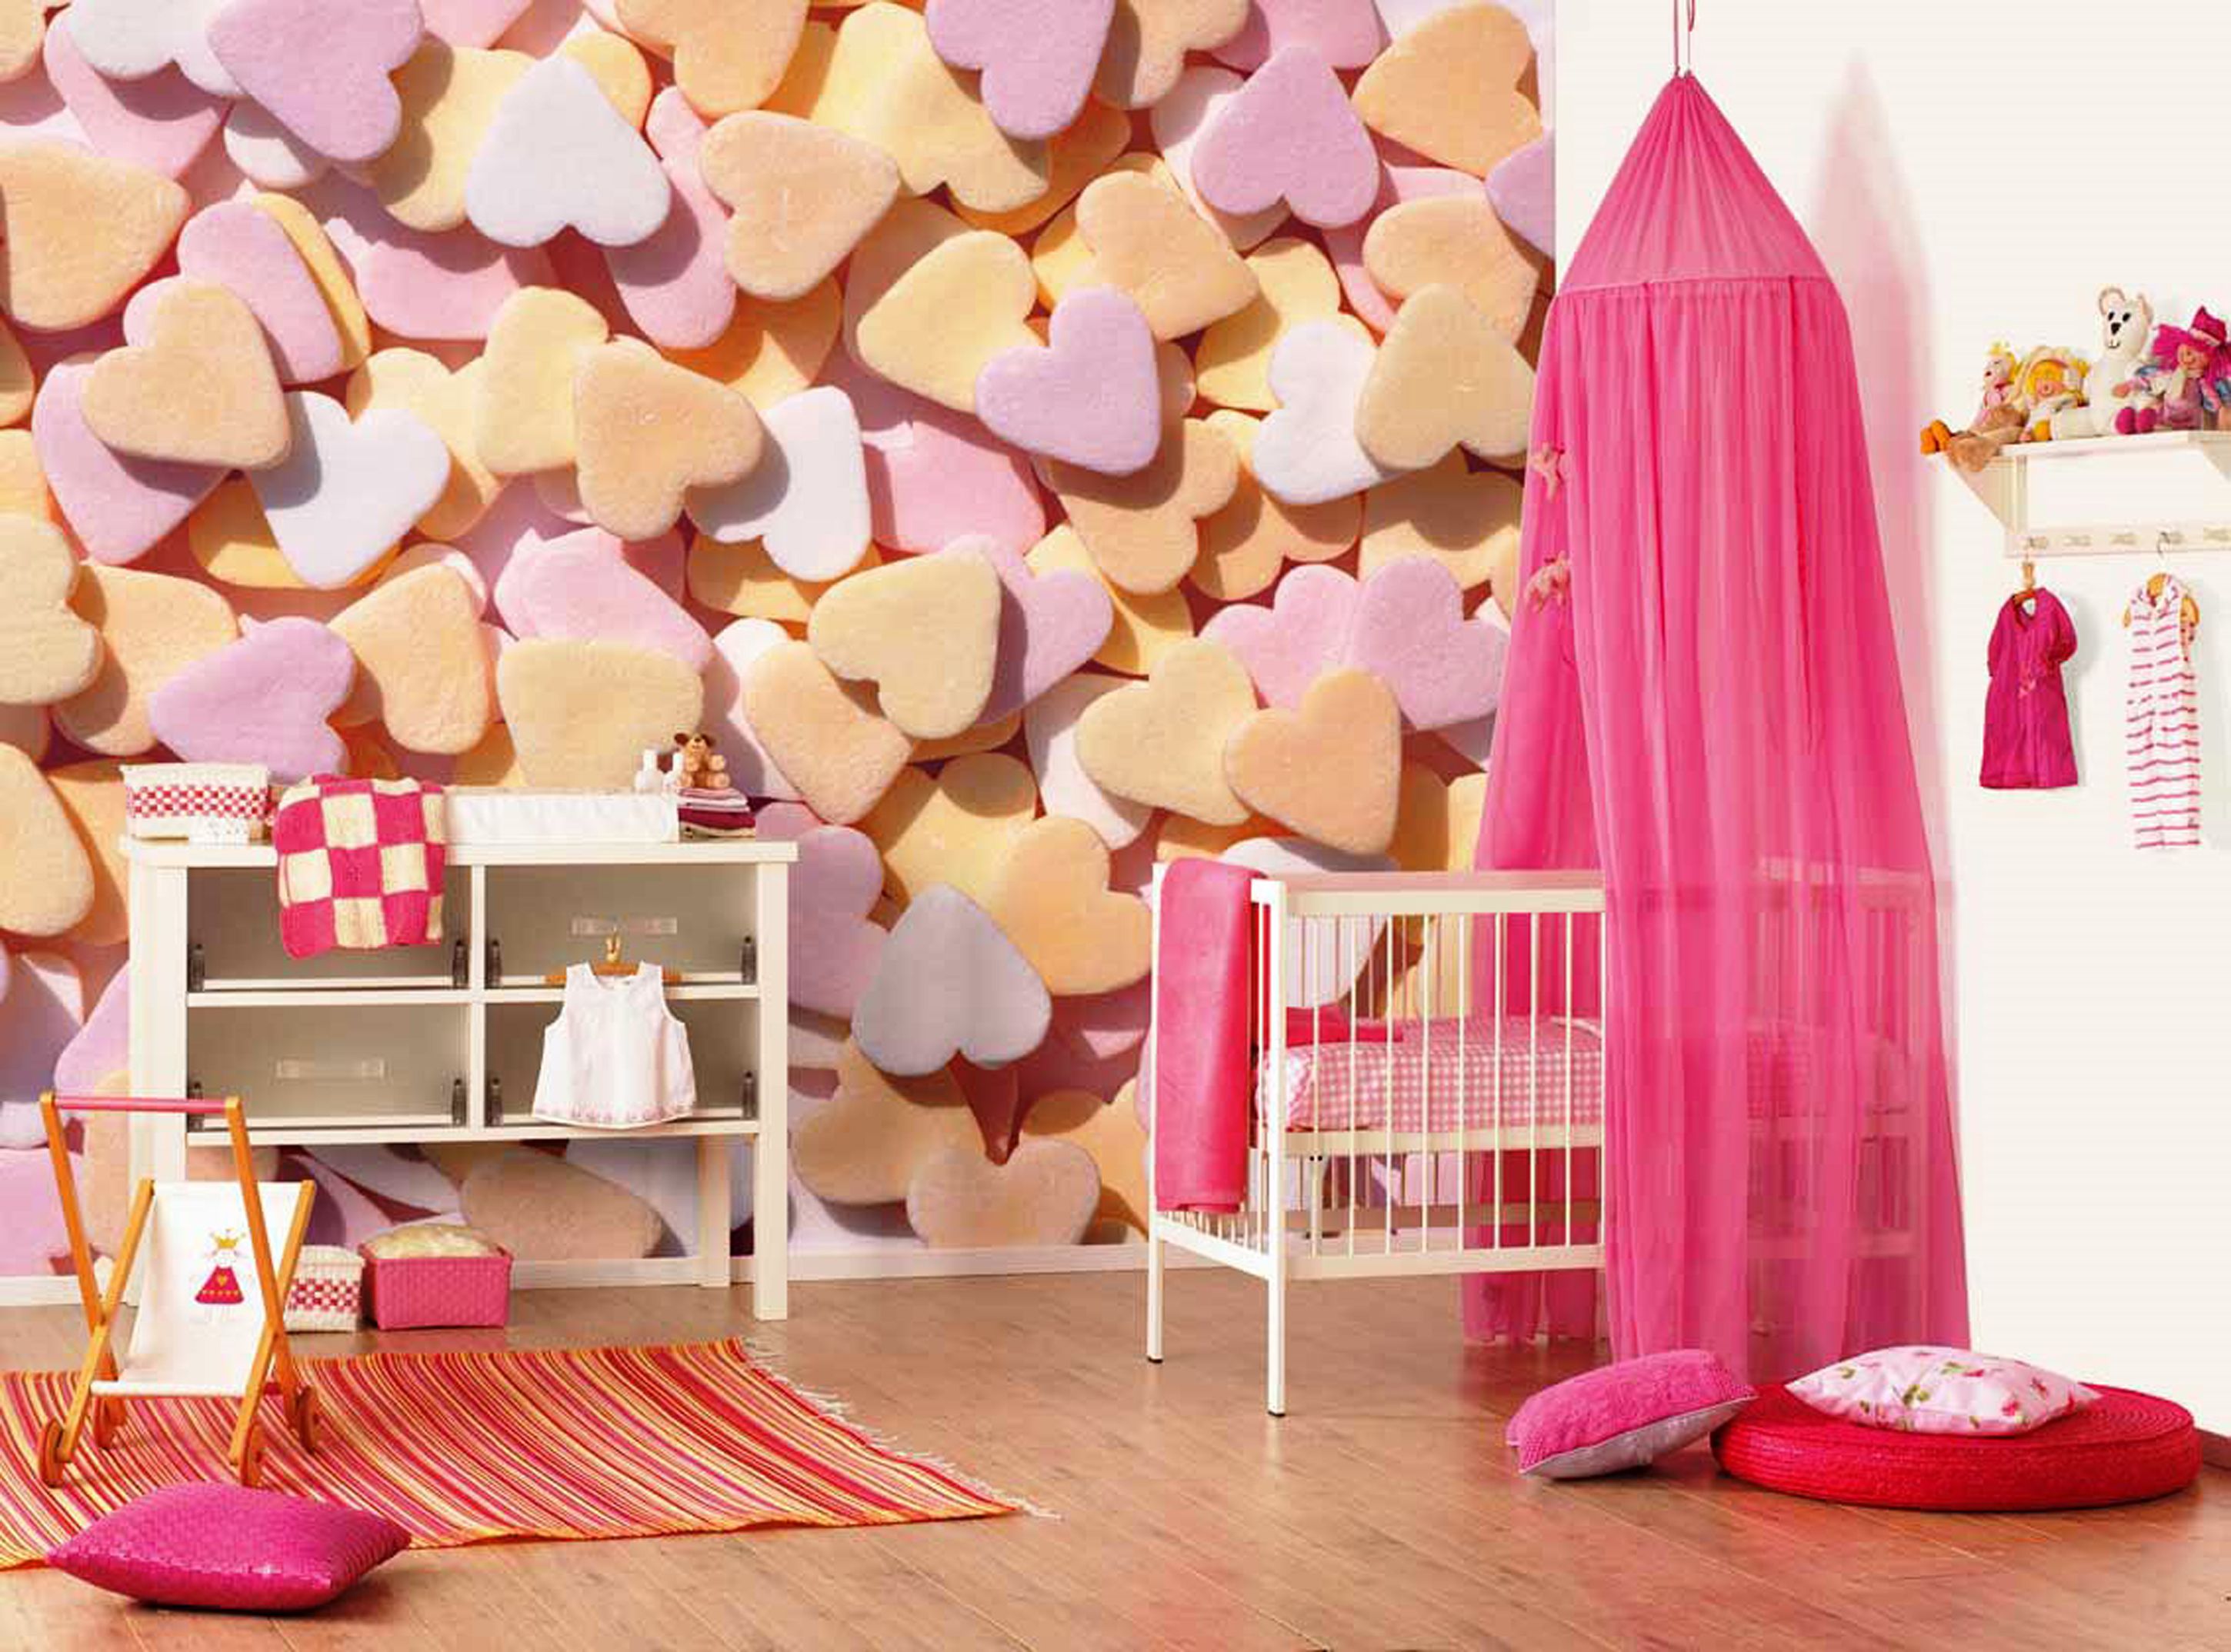 Romantic Girls Design With White Crib With Fuchsia Curtain And Colourful Heart Wallpaper And Also White Drawer Chest With Transparent Drawers Cool Design Bedroom Ideas For Girls Bedrooms (View 17 of 39)